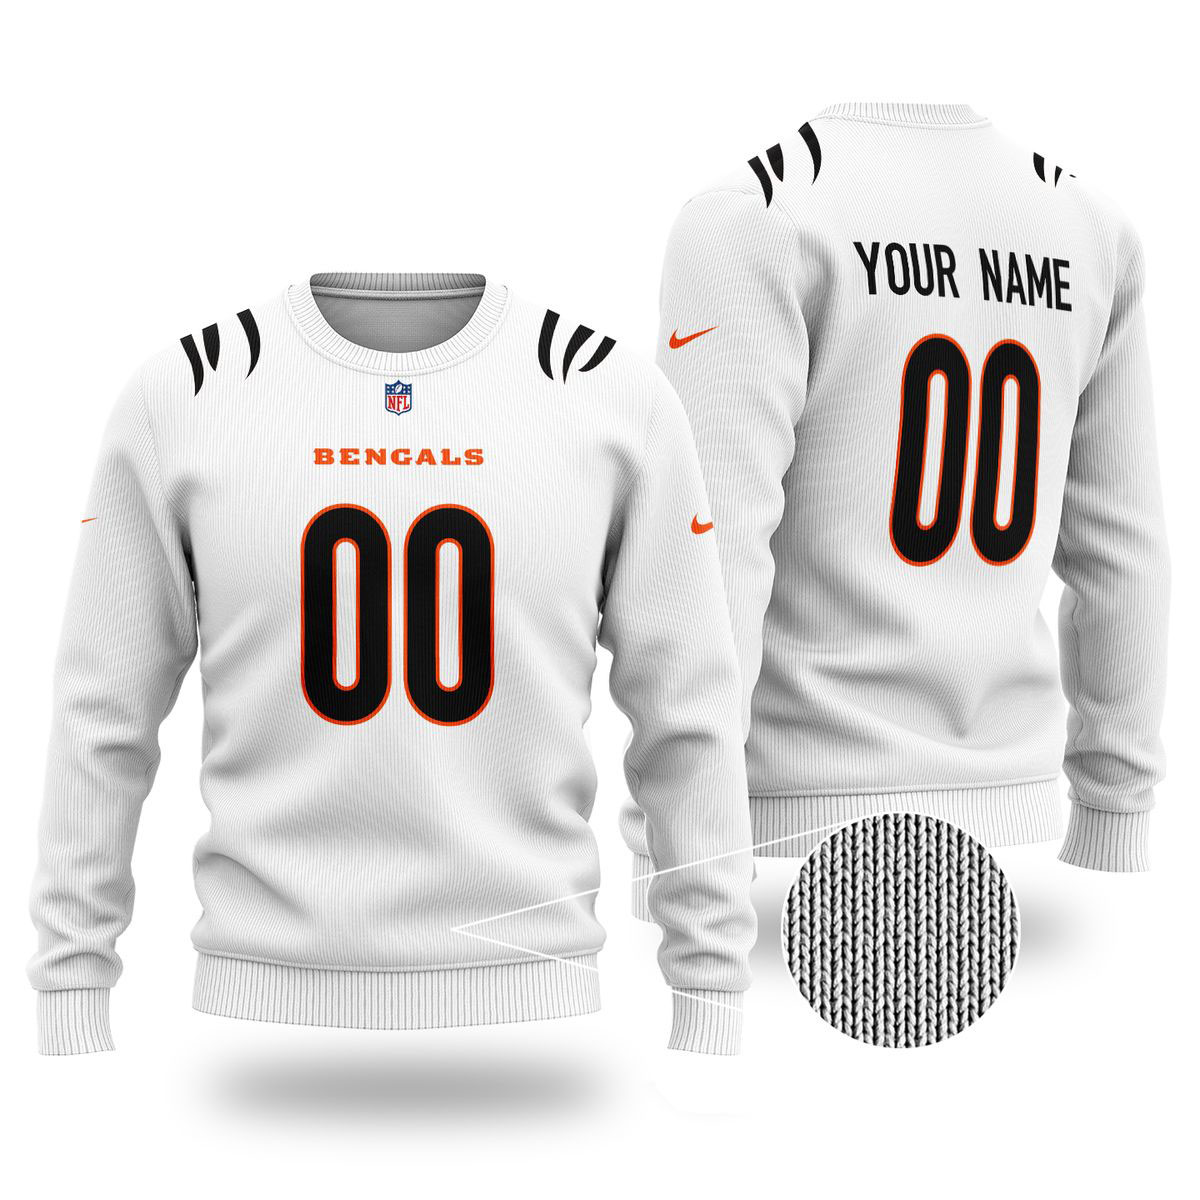 Personalized Cincinnati Bengals White Ugly Christmas Sweater - Bengals Ugly Christmas Sweater - Custom Name Number Bengals Sweater